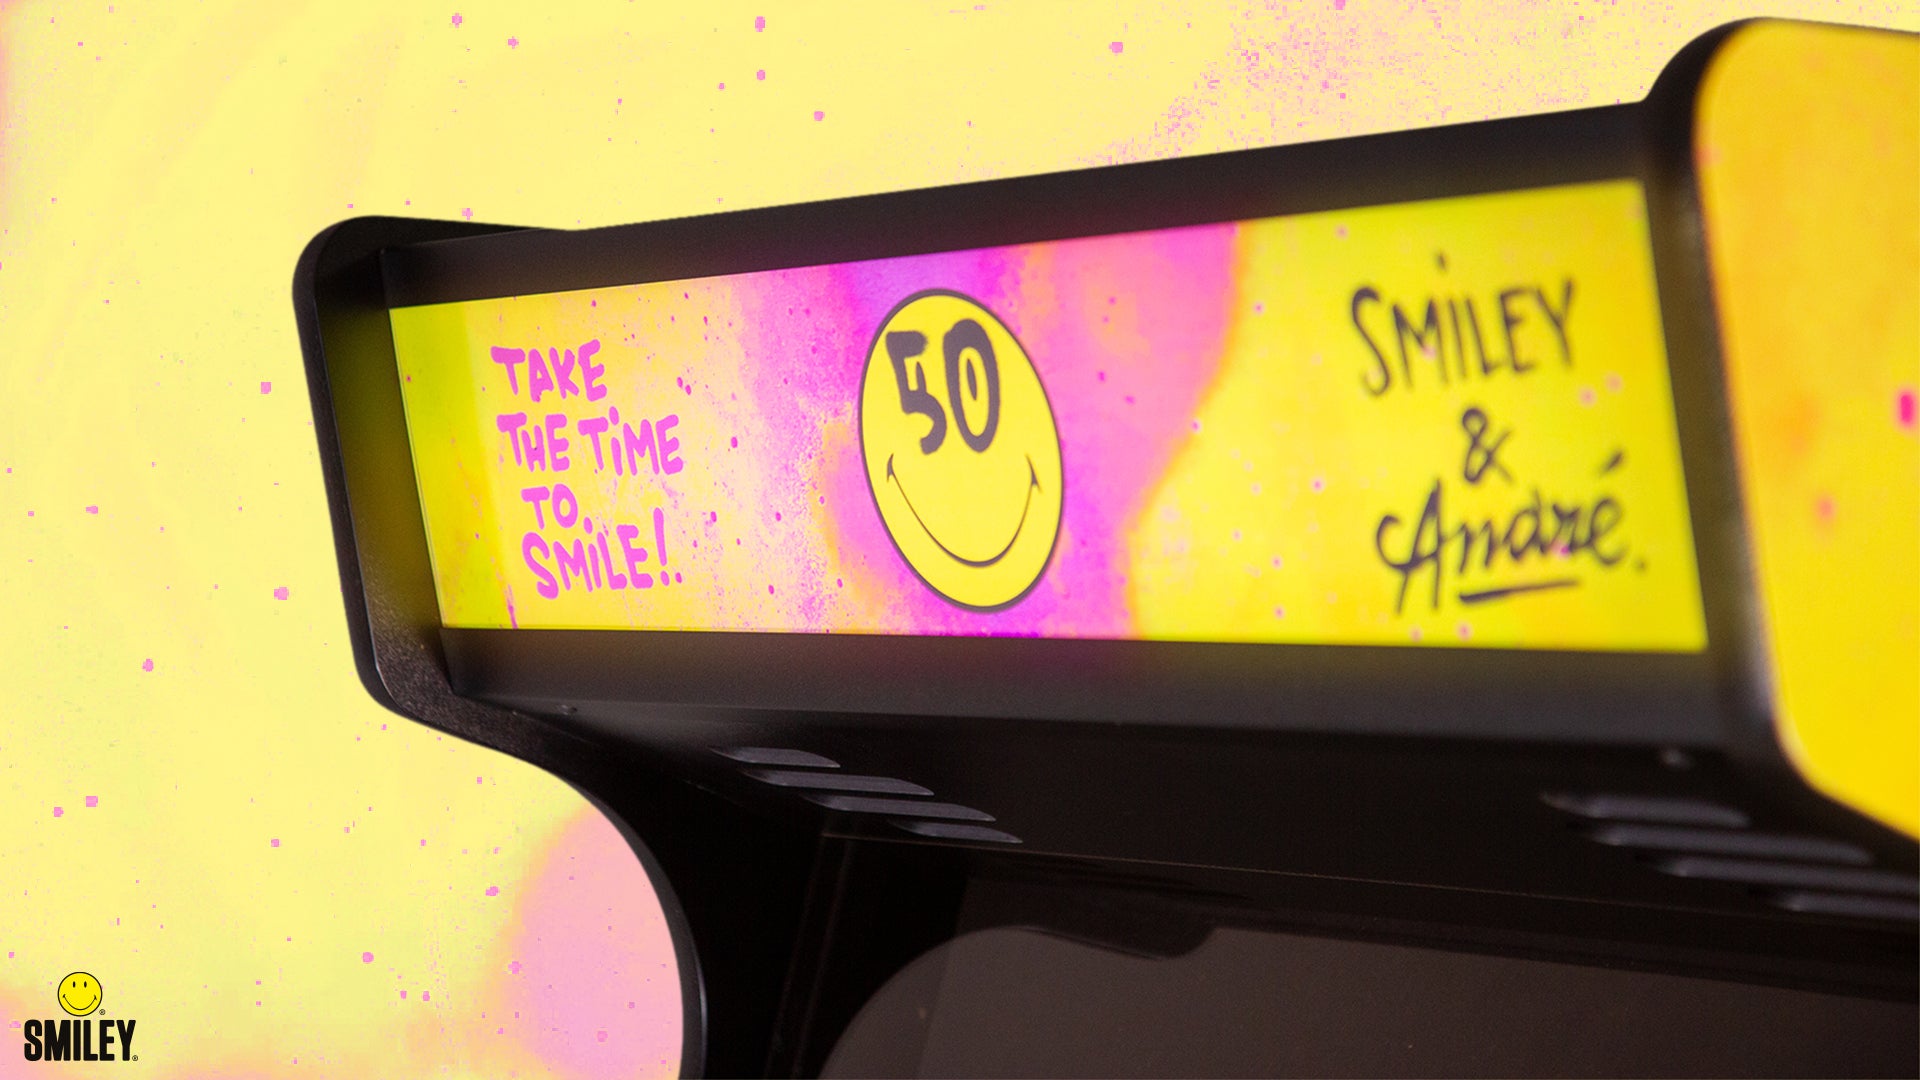 Neo Legend X Smiley X André - Classic Arcade Limited edition 50th anniversary